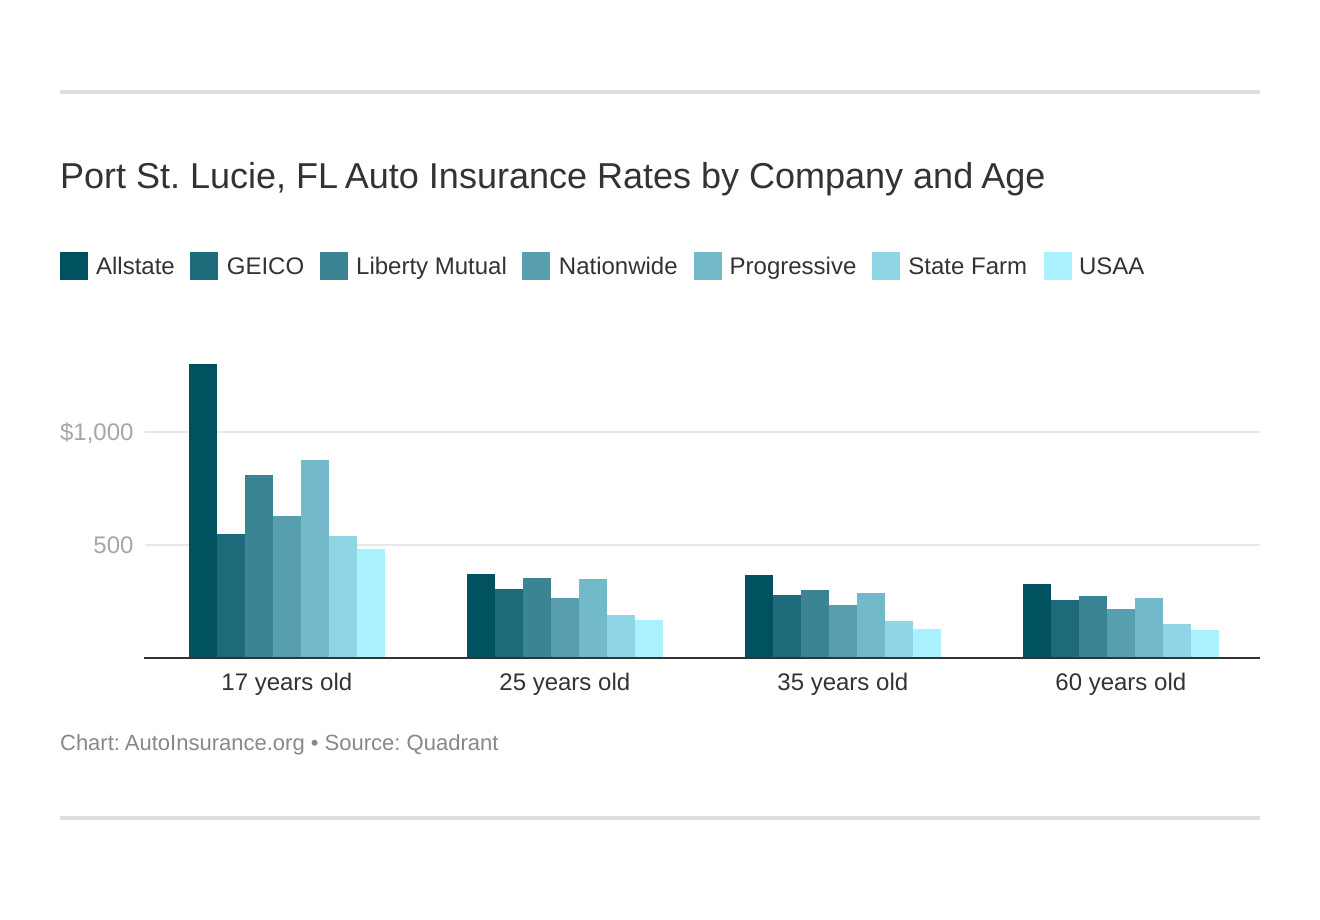 Port St. Lucie, FL Auto Insurance Rates by Company and Age